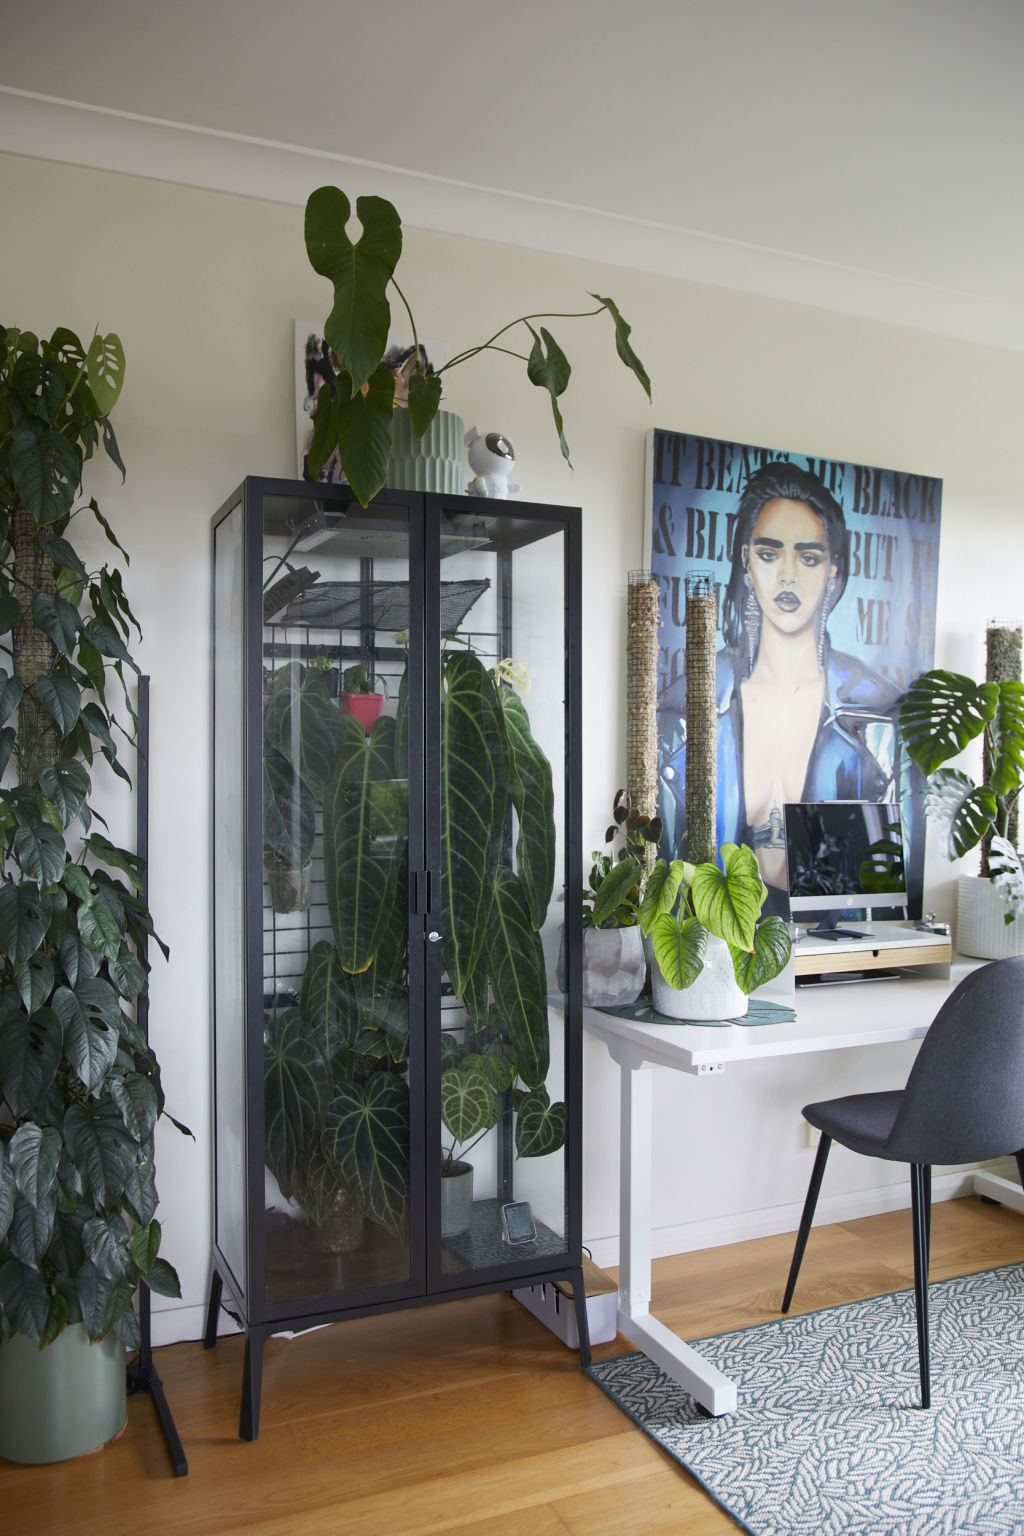 Some plants spend time in an IKEA cabinet Gettmann converted into a greenhouse for more stable conditions. Photo: Nicky Ryan